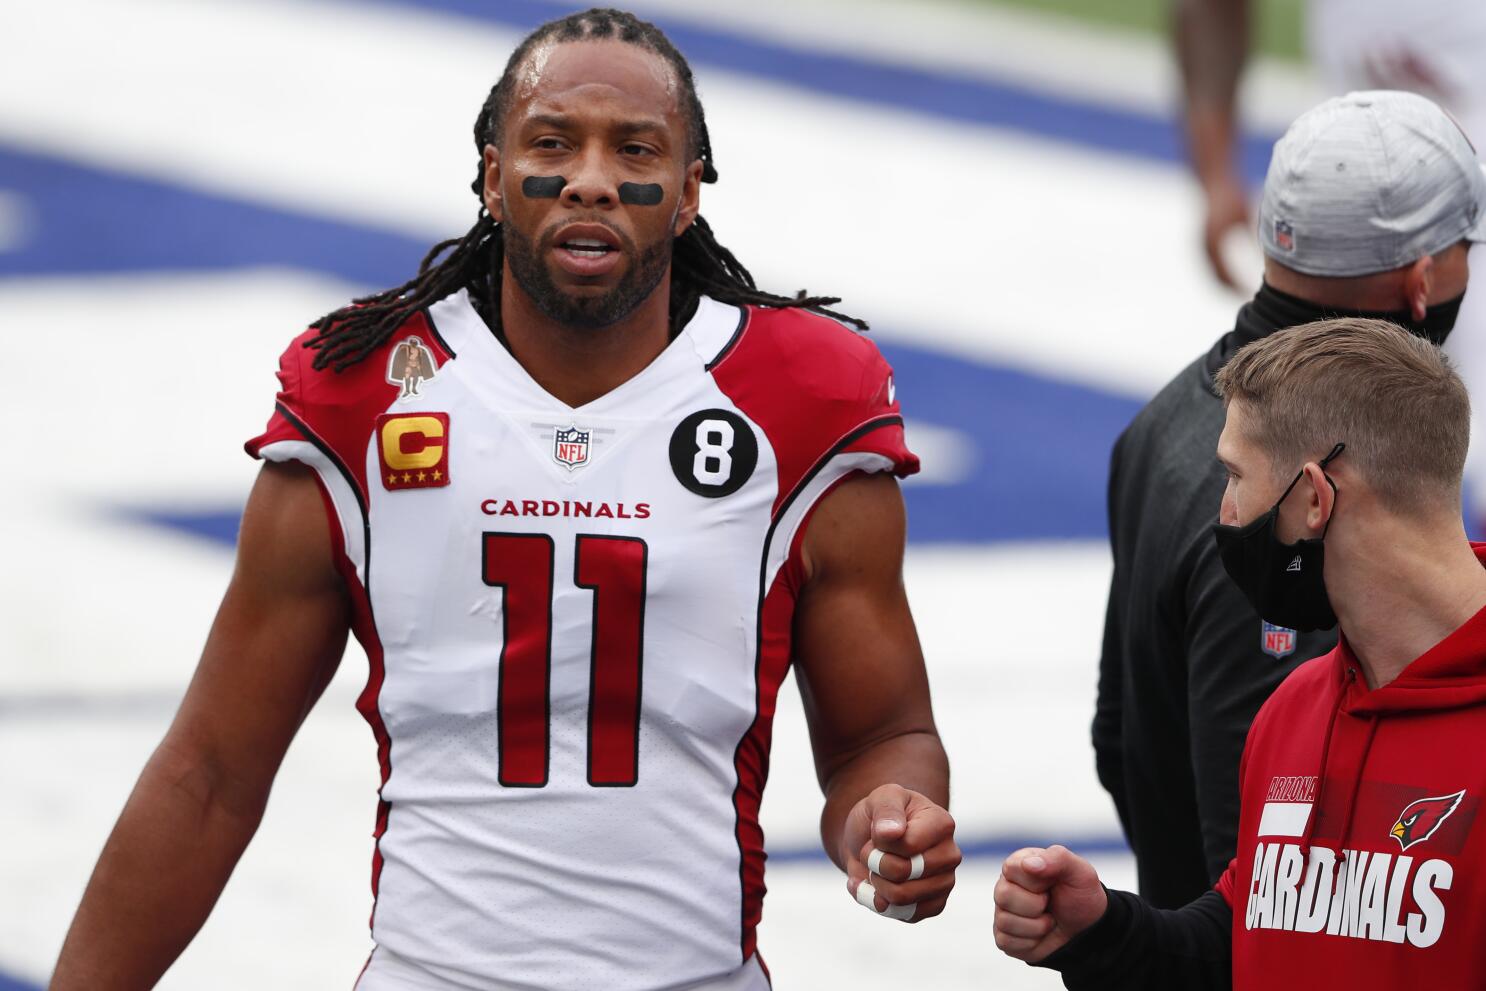 Best images of Larry Fitzgerald's TD catches, 15 years after his 1st